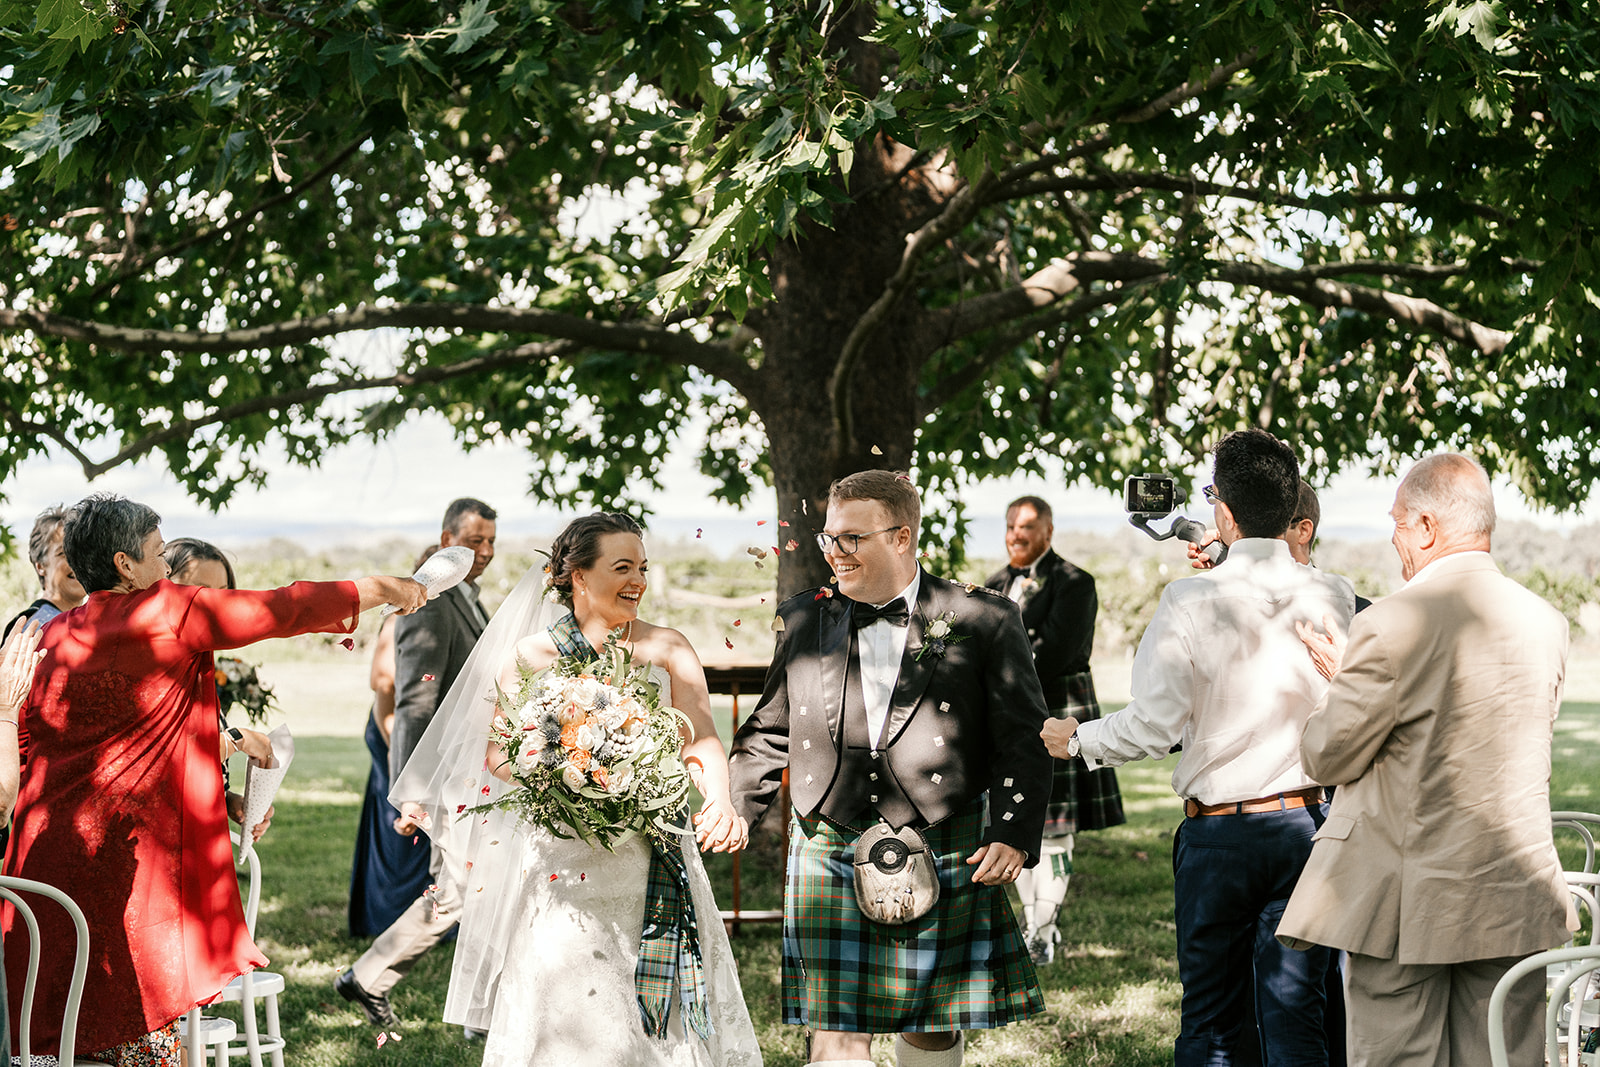 Brown Brothers wedding ceremony. Under the oak tree wedding ceremony at Brown Brothers, Milawa. Scottish style wedding.